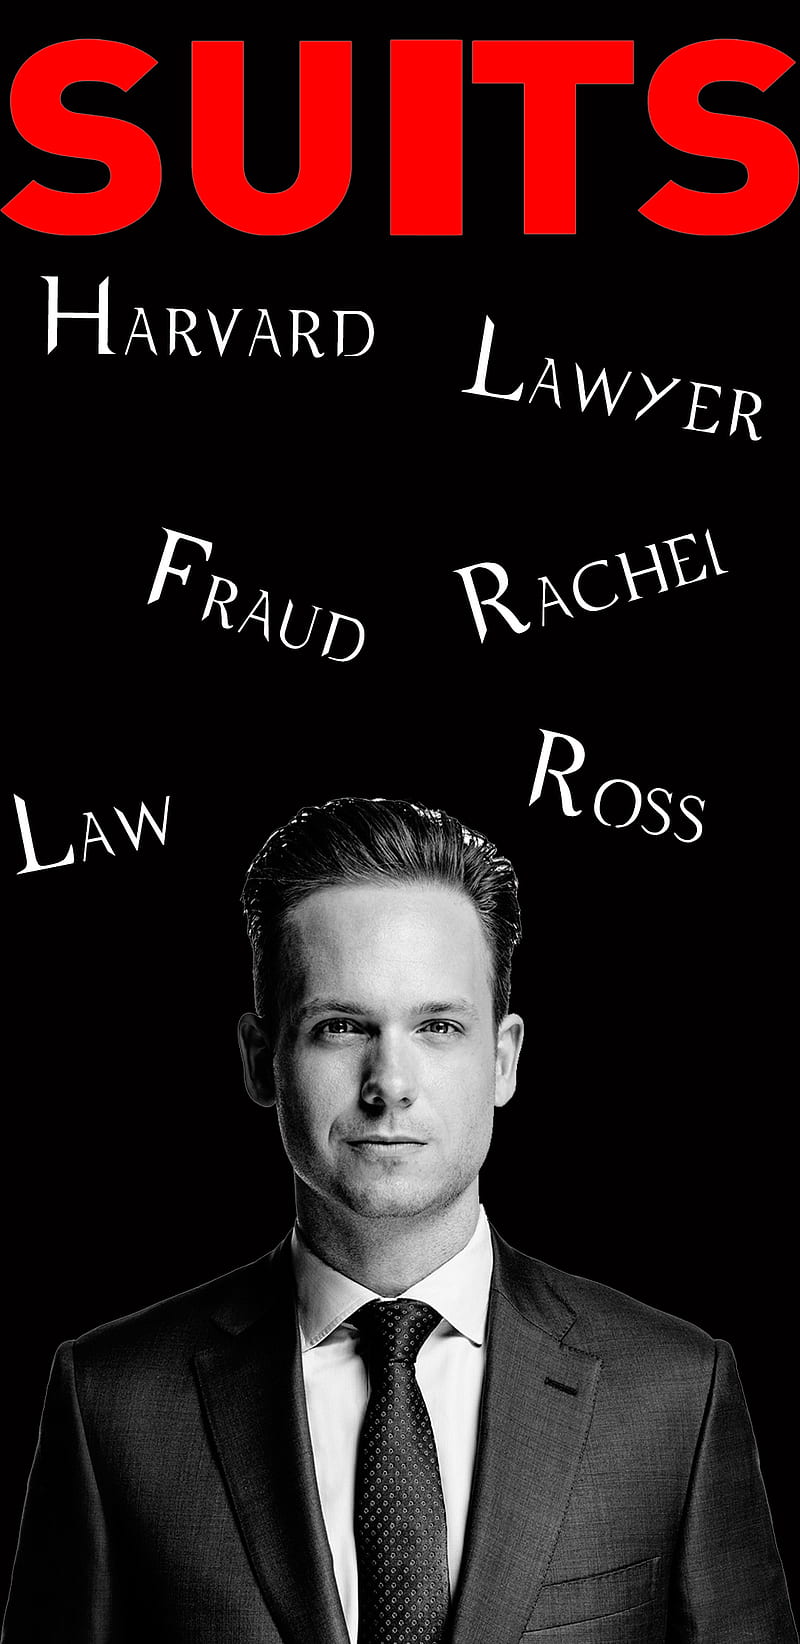 Suits, fraud, law, lawyer, mike, mike ross, ross, HD phone wallpaper